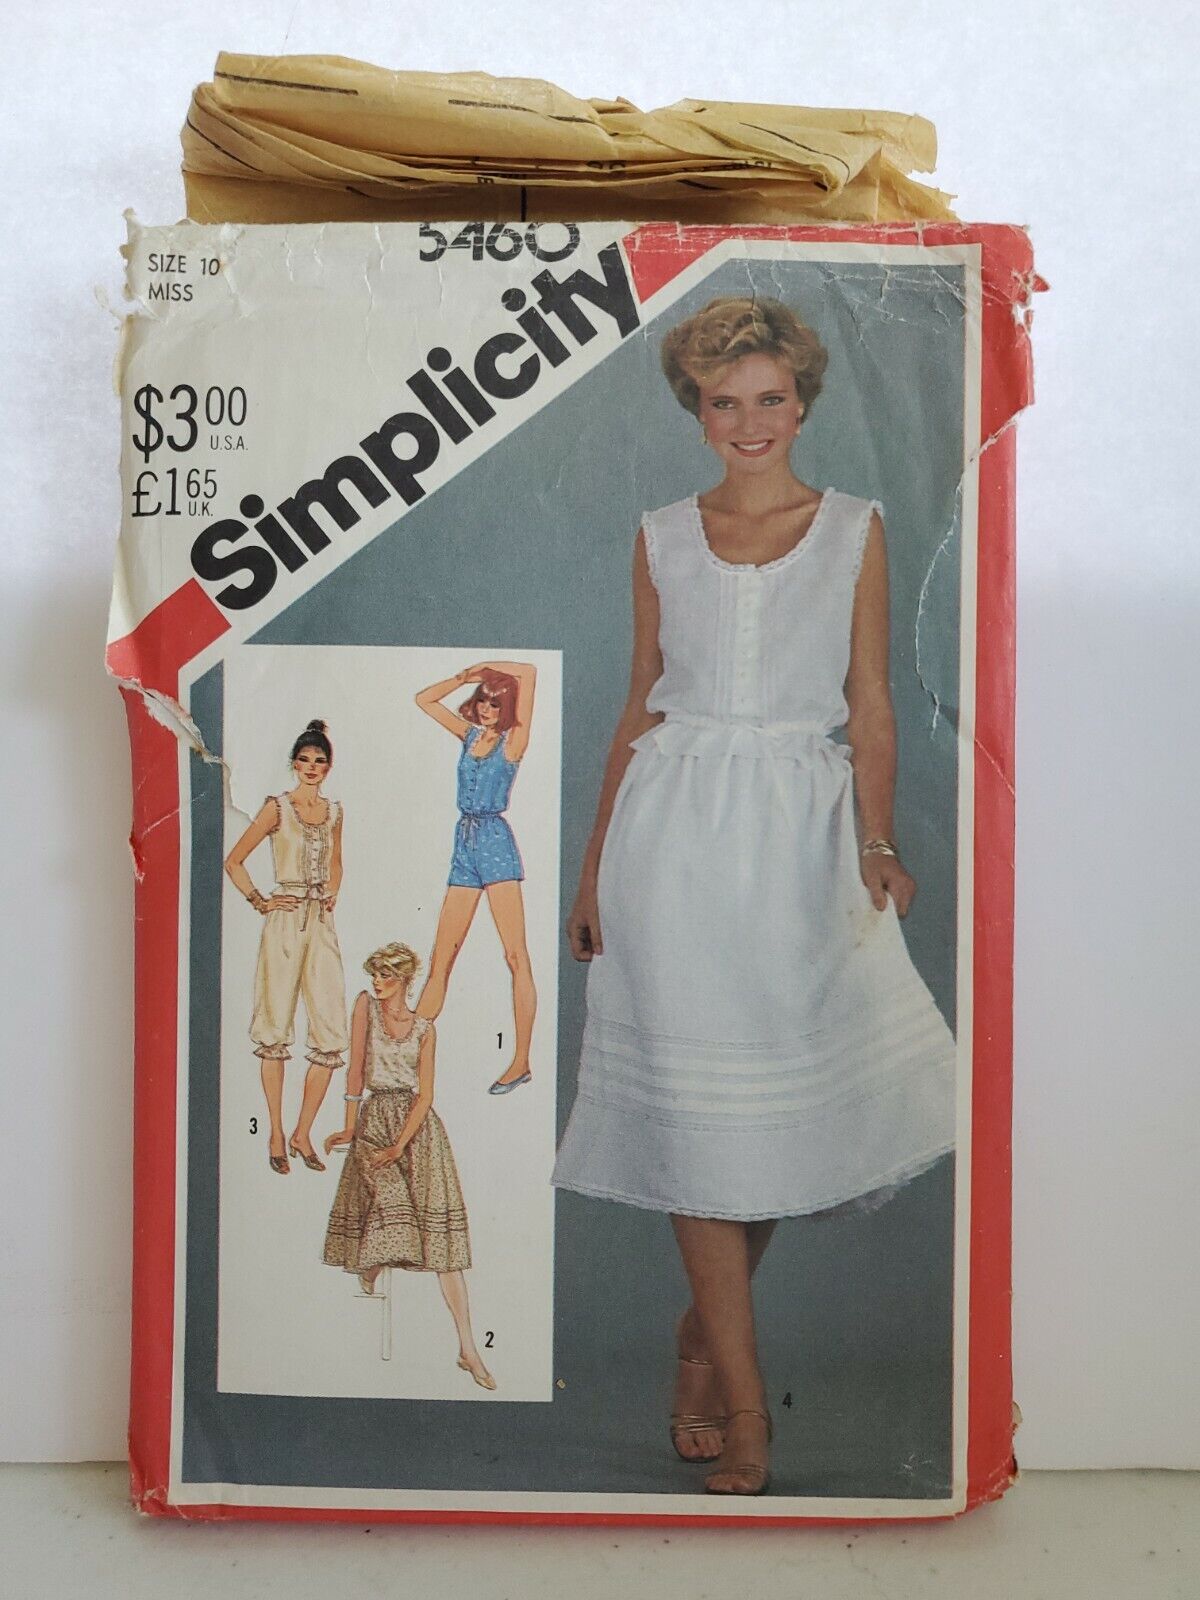 Simplicity 5460 Vintage style Camisole, Slip, Pantalettes, Teddy. Miss size 10